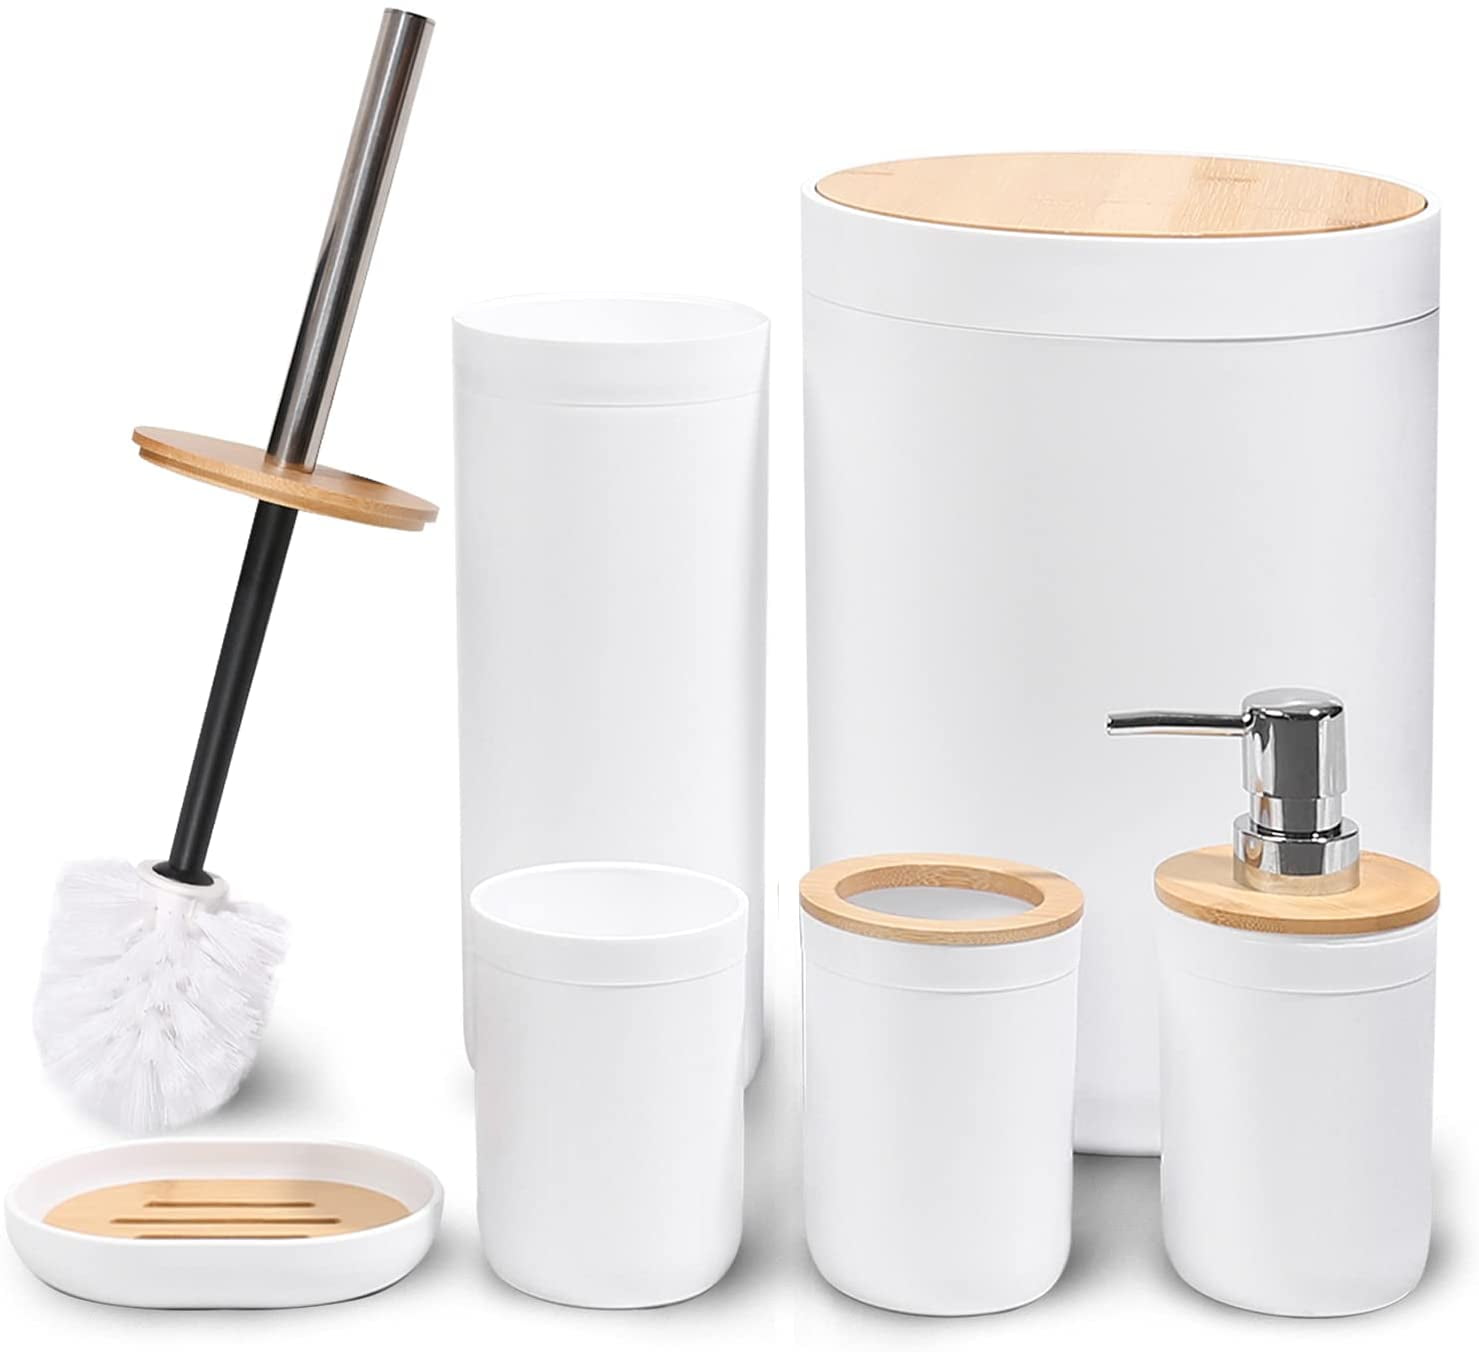 Soap Dish 3328 Style-Beige Toilet Brush Trash Can Housewarming Gift Set Toothbrush Holder Soap Dispenser 6 Pcs Bathroom Accessories Set Toothbrush Cup